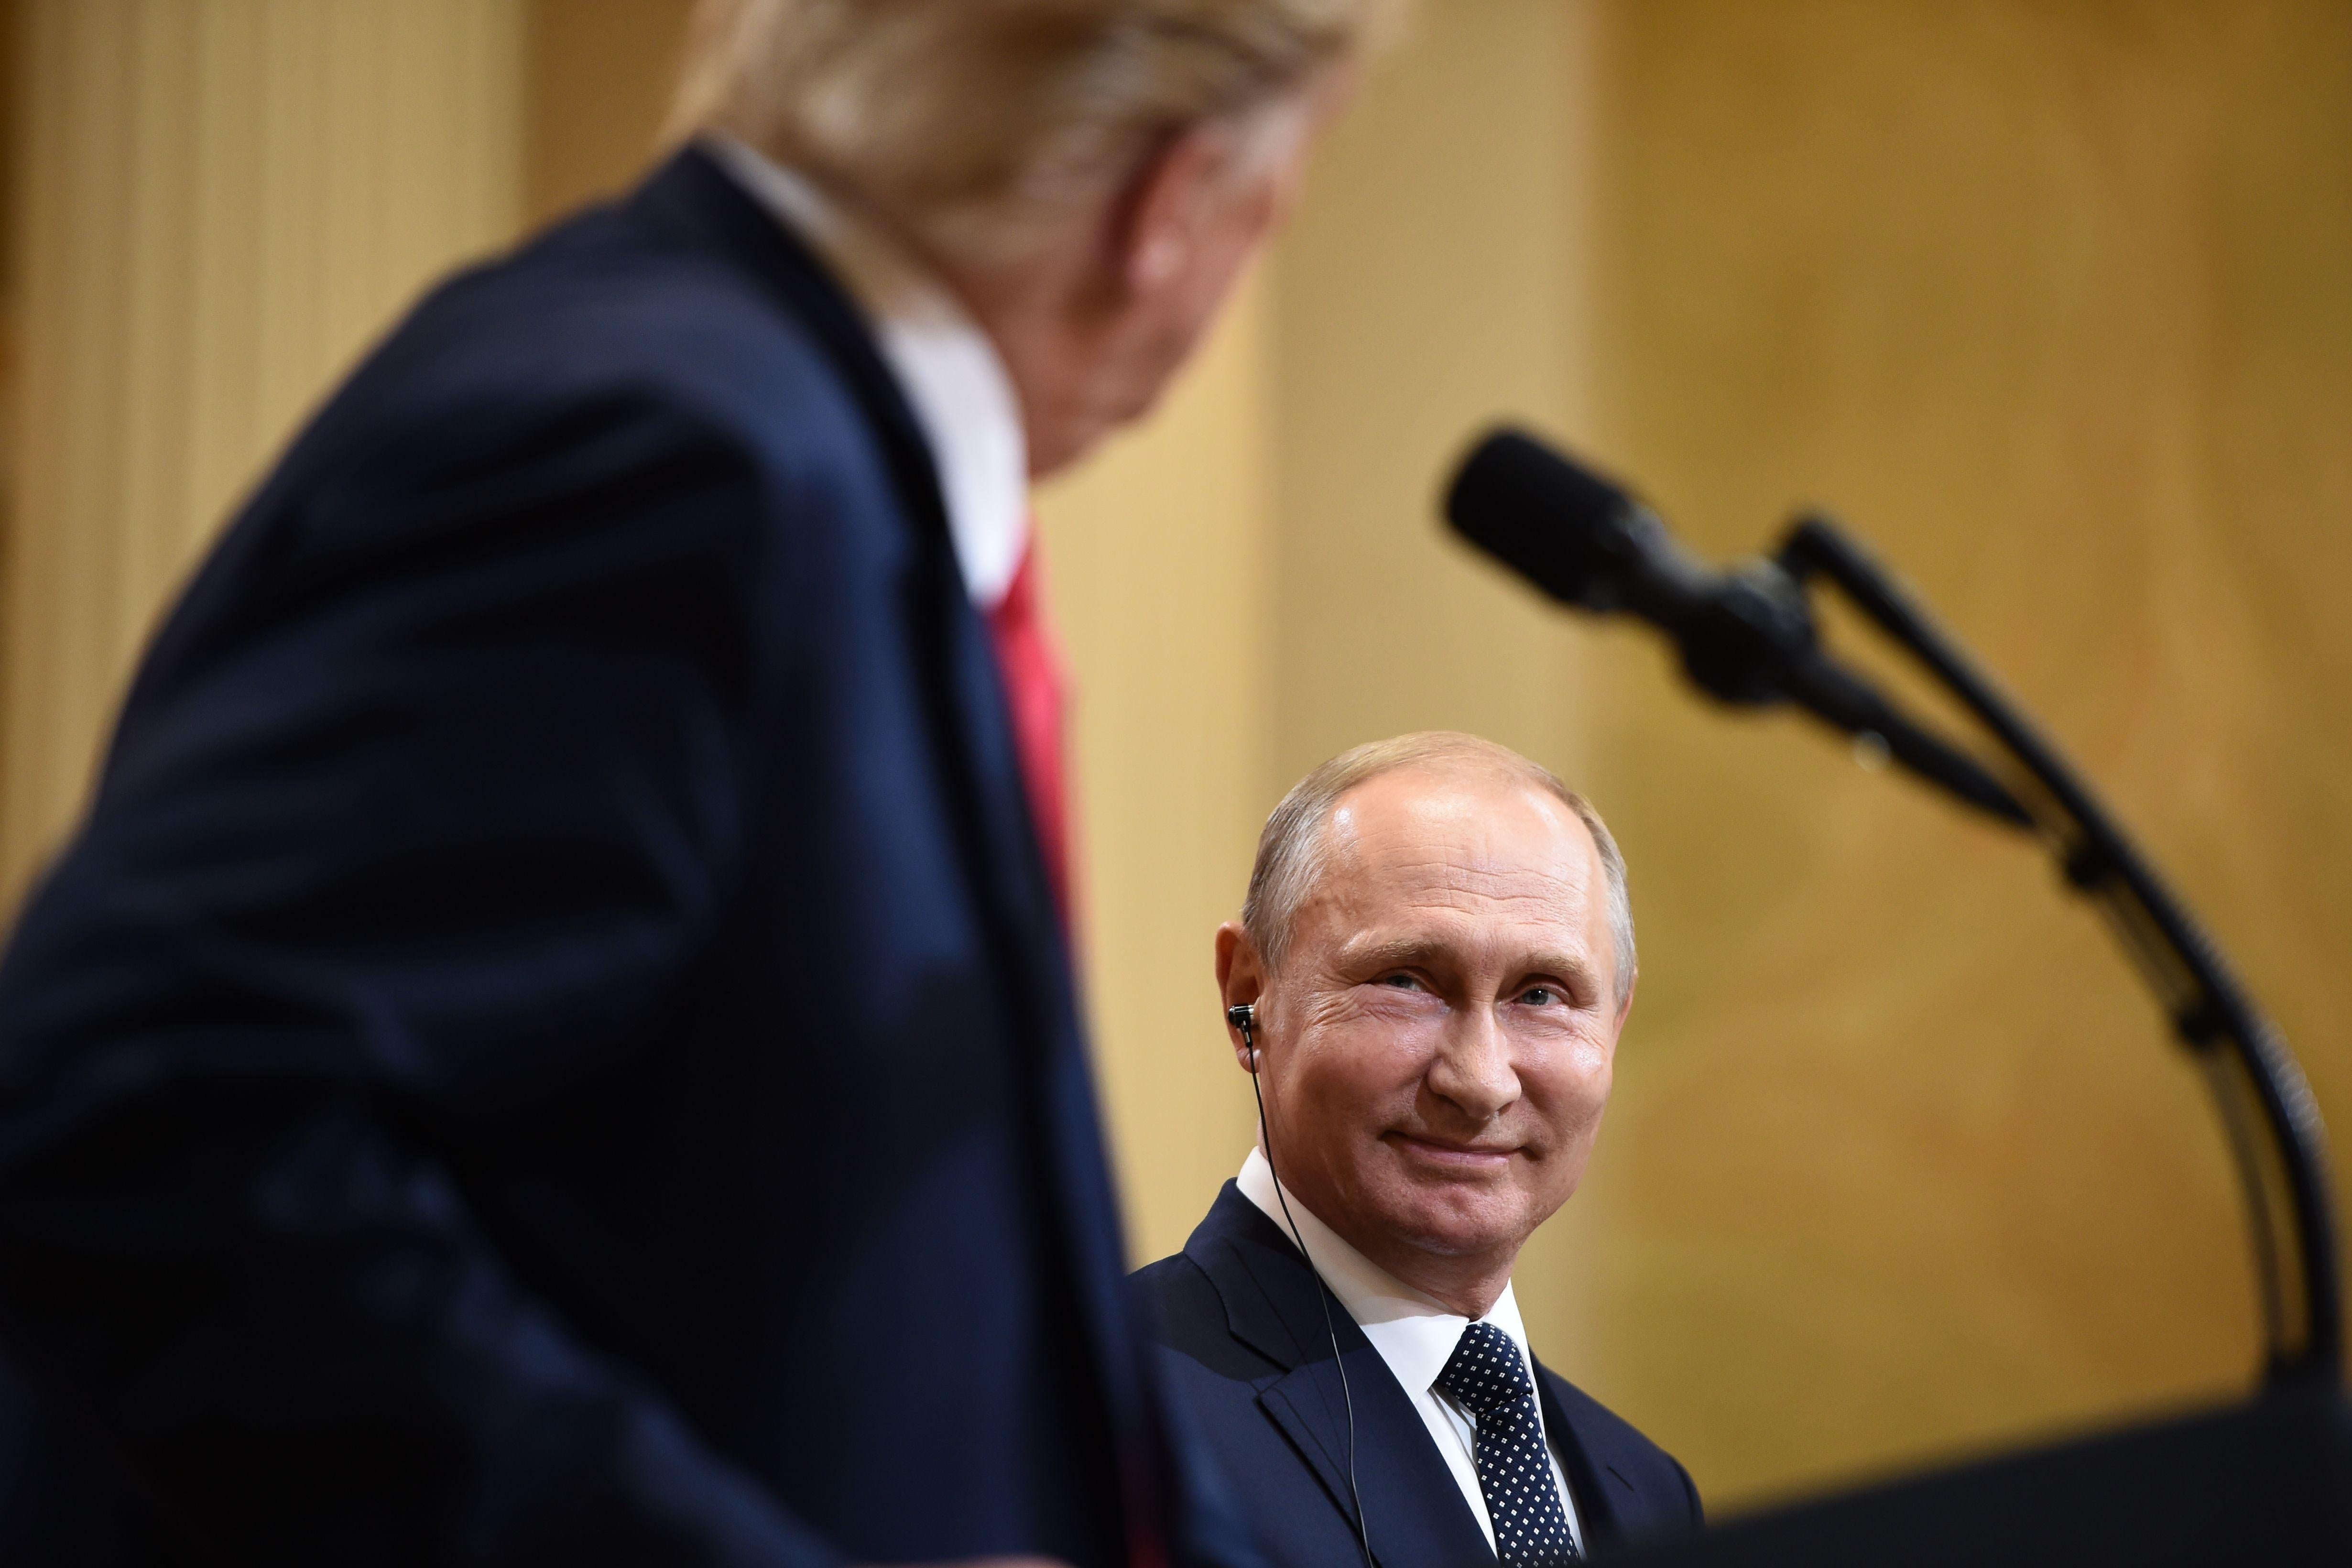 President Donald Trump and Russia's President Vladimir Putin attend a joint press conference after a meeting at the Presidential Palace in Helsinki on July 16, 2018.